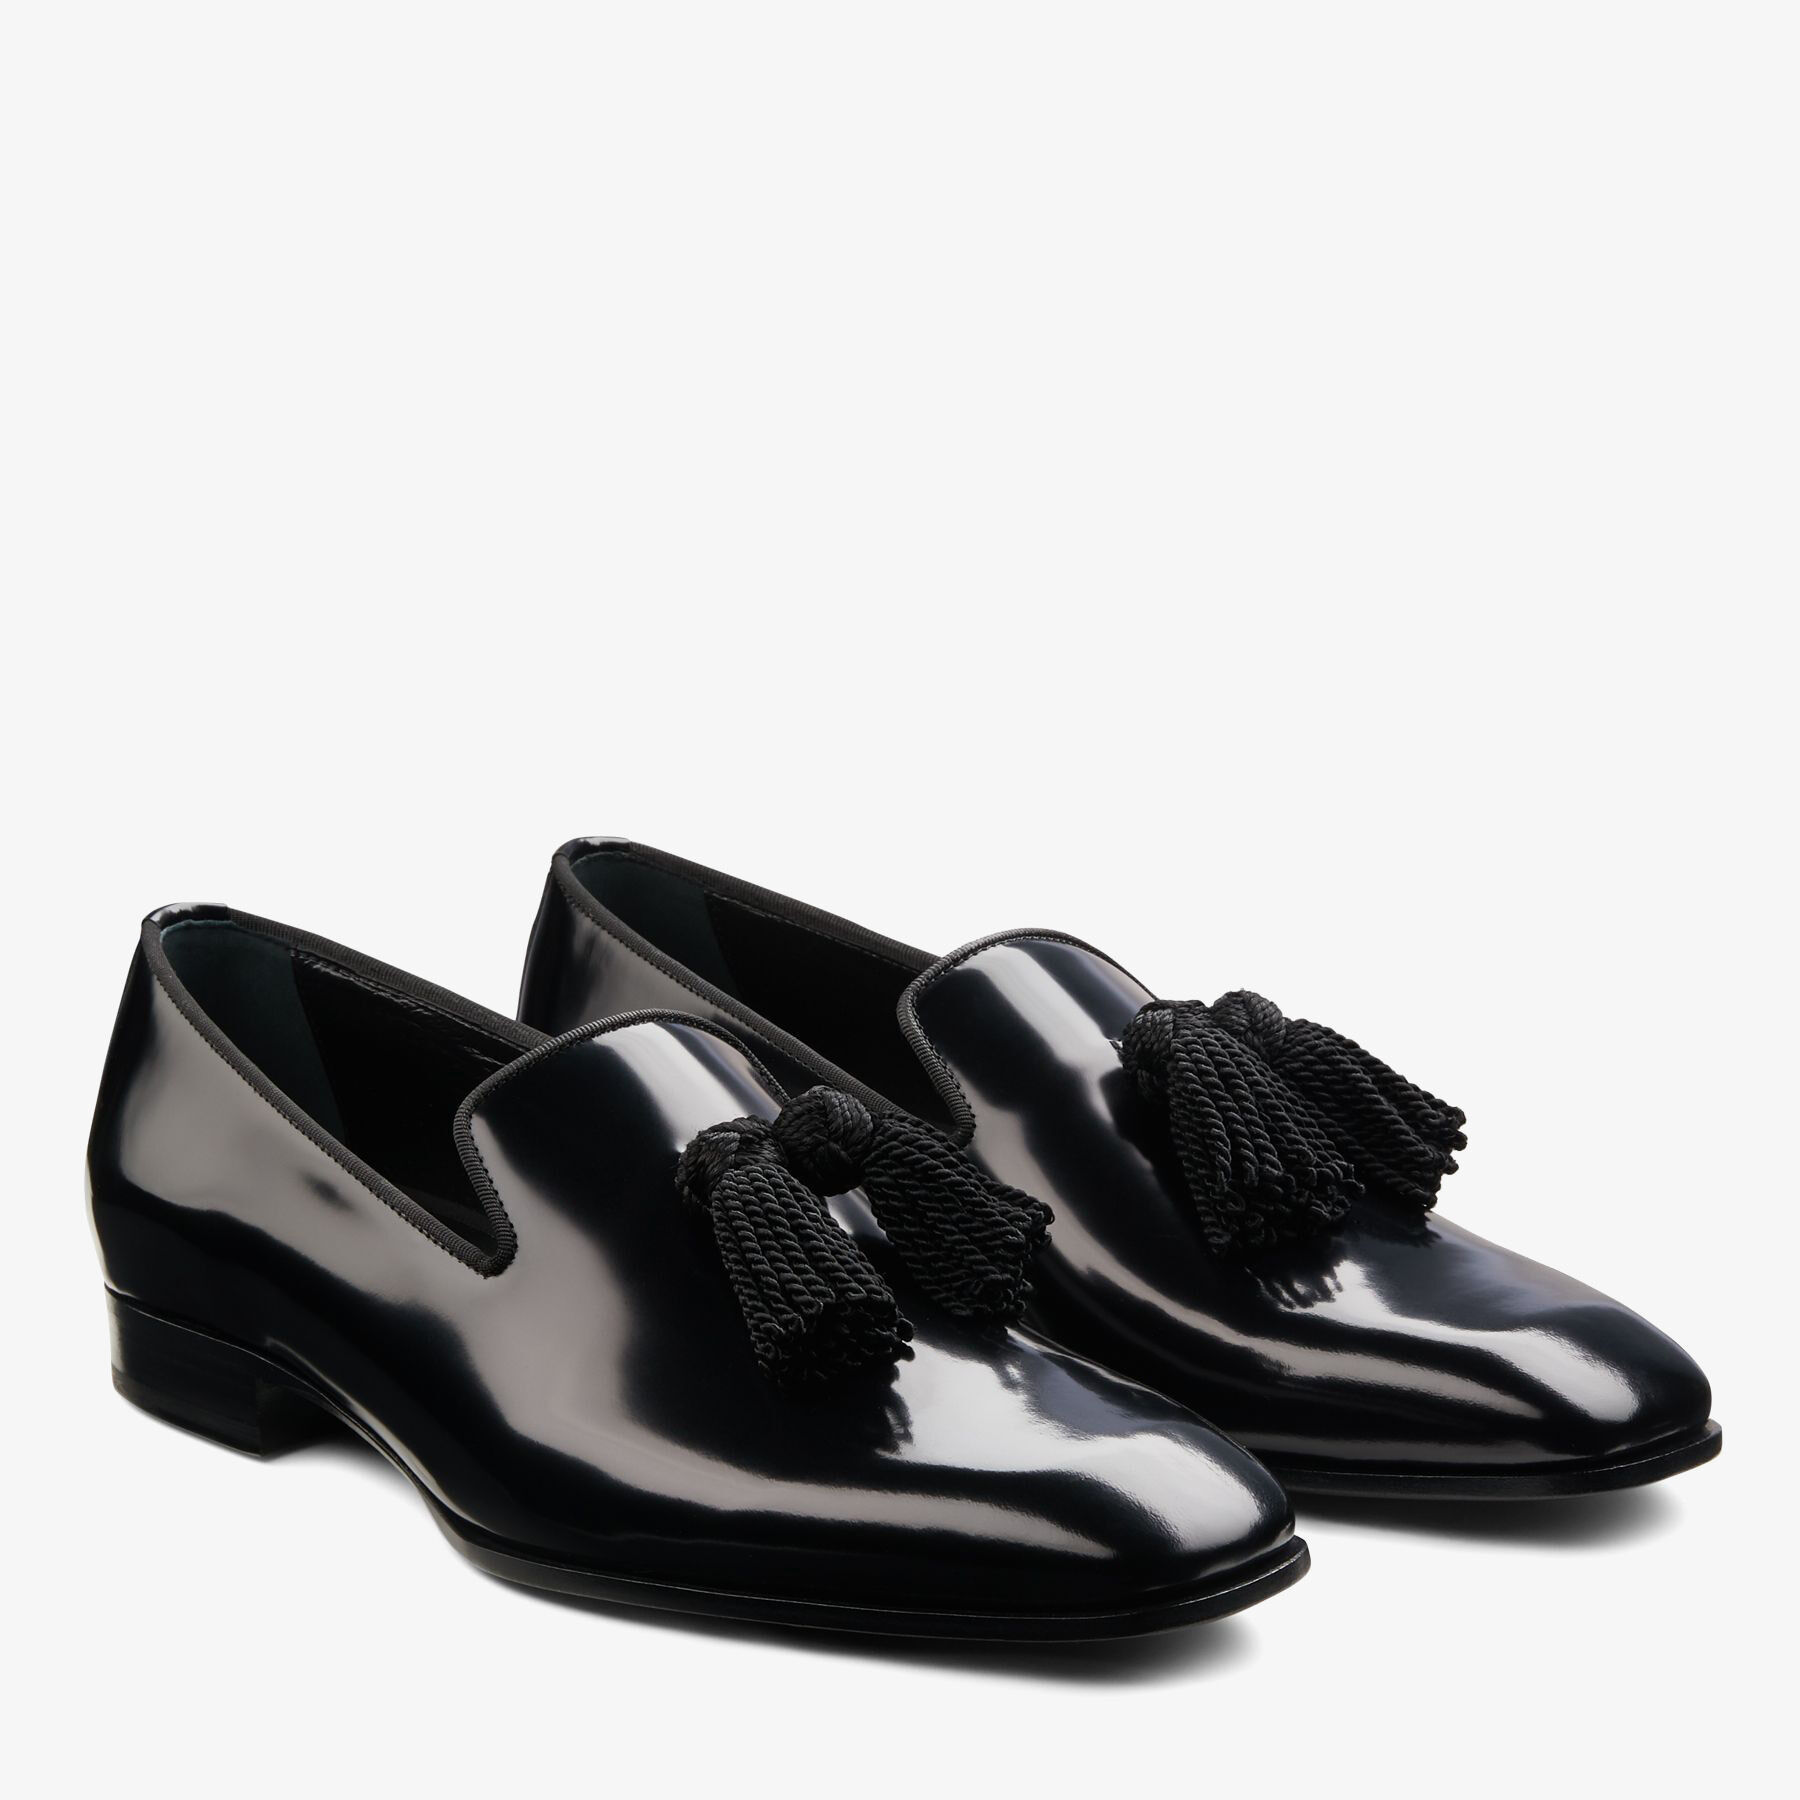 Black Soft Shiny Calf Leather Loafers | FOXLEY/M | Pre-Fall '20